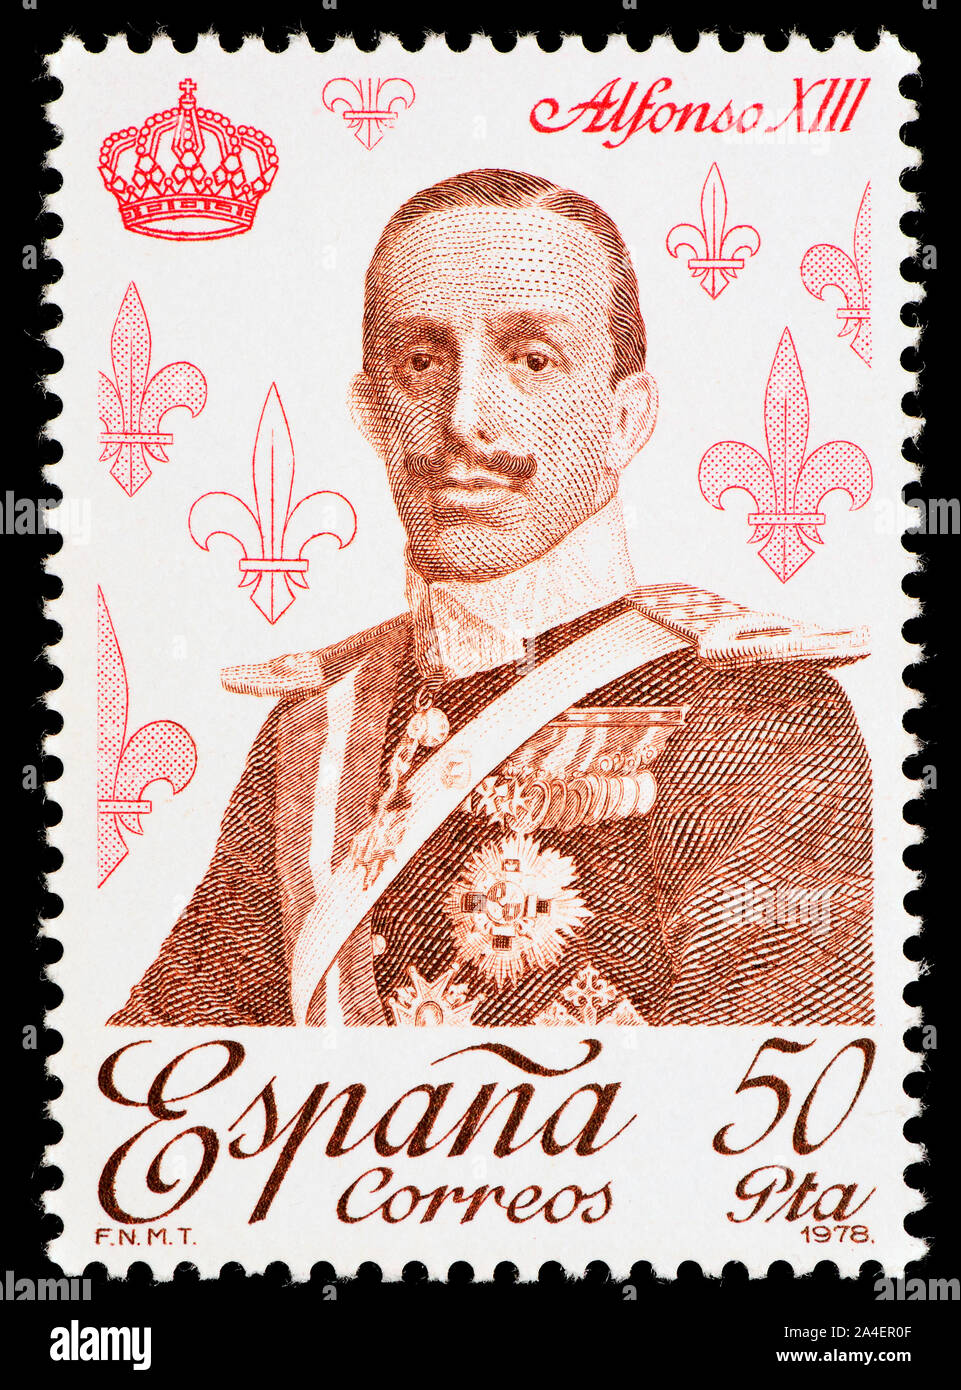 Spanish postage stamp (1978) : King Alfonso XIII of Spain Stock Photo